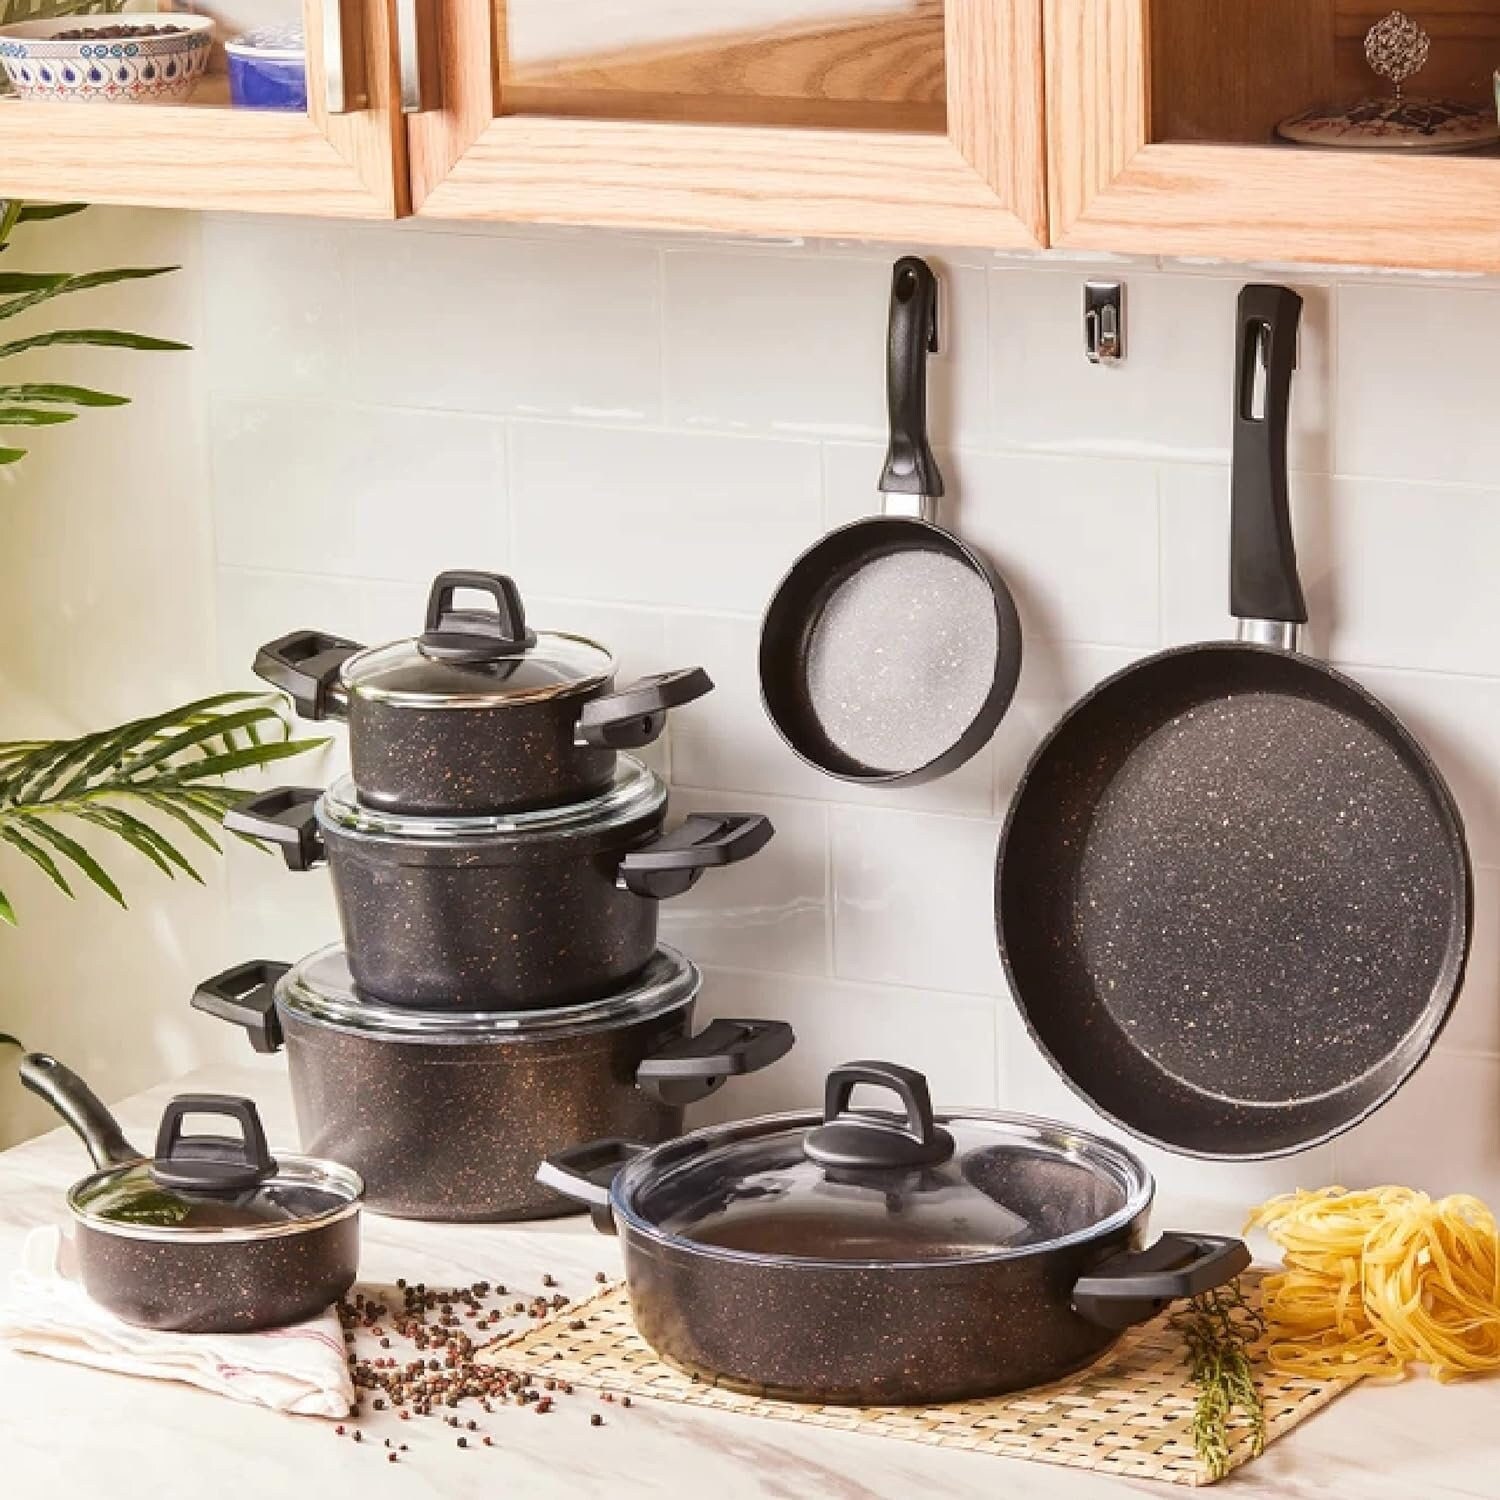 Enamel Cookware for Healthy and Durable Cooking - Karaca